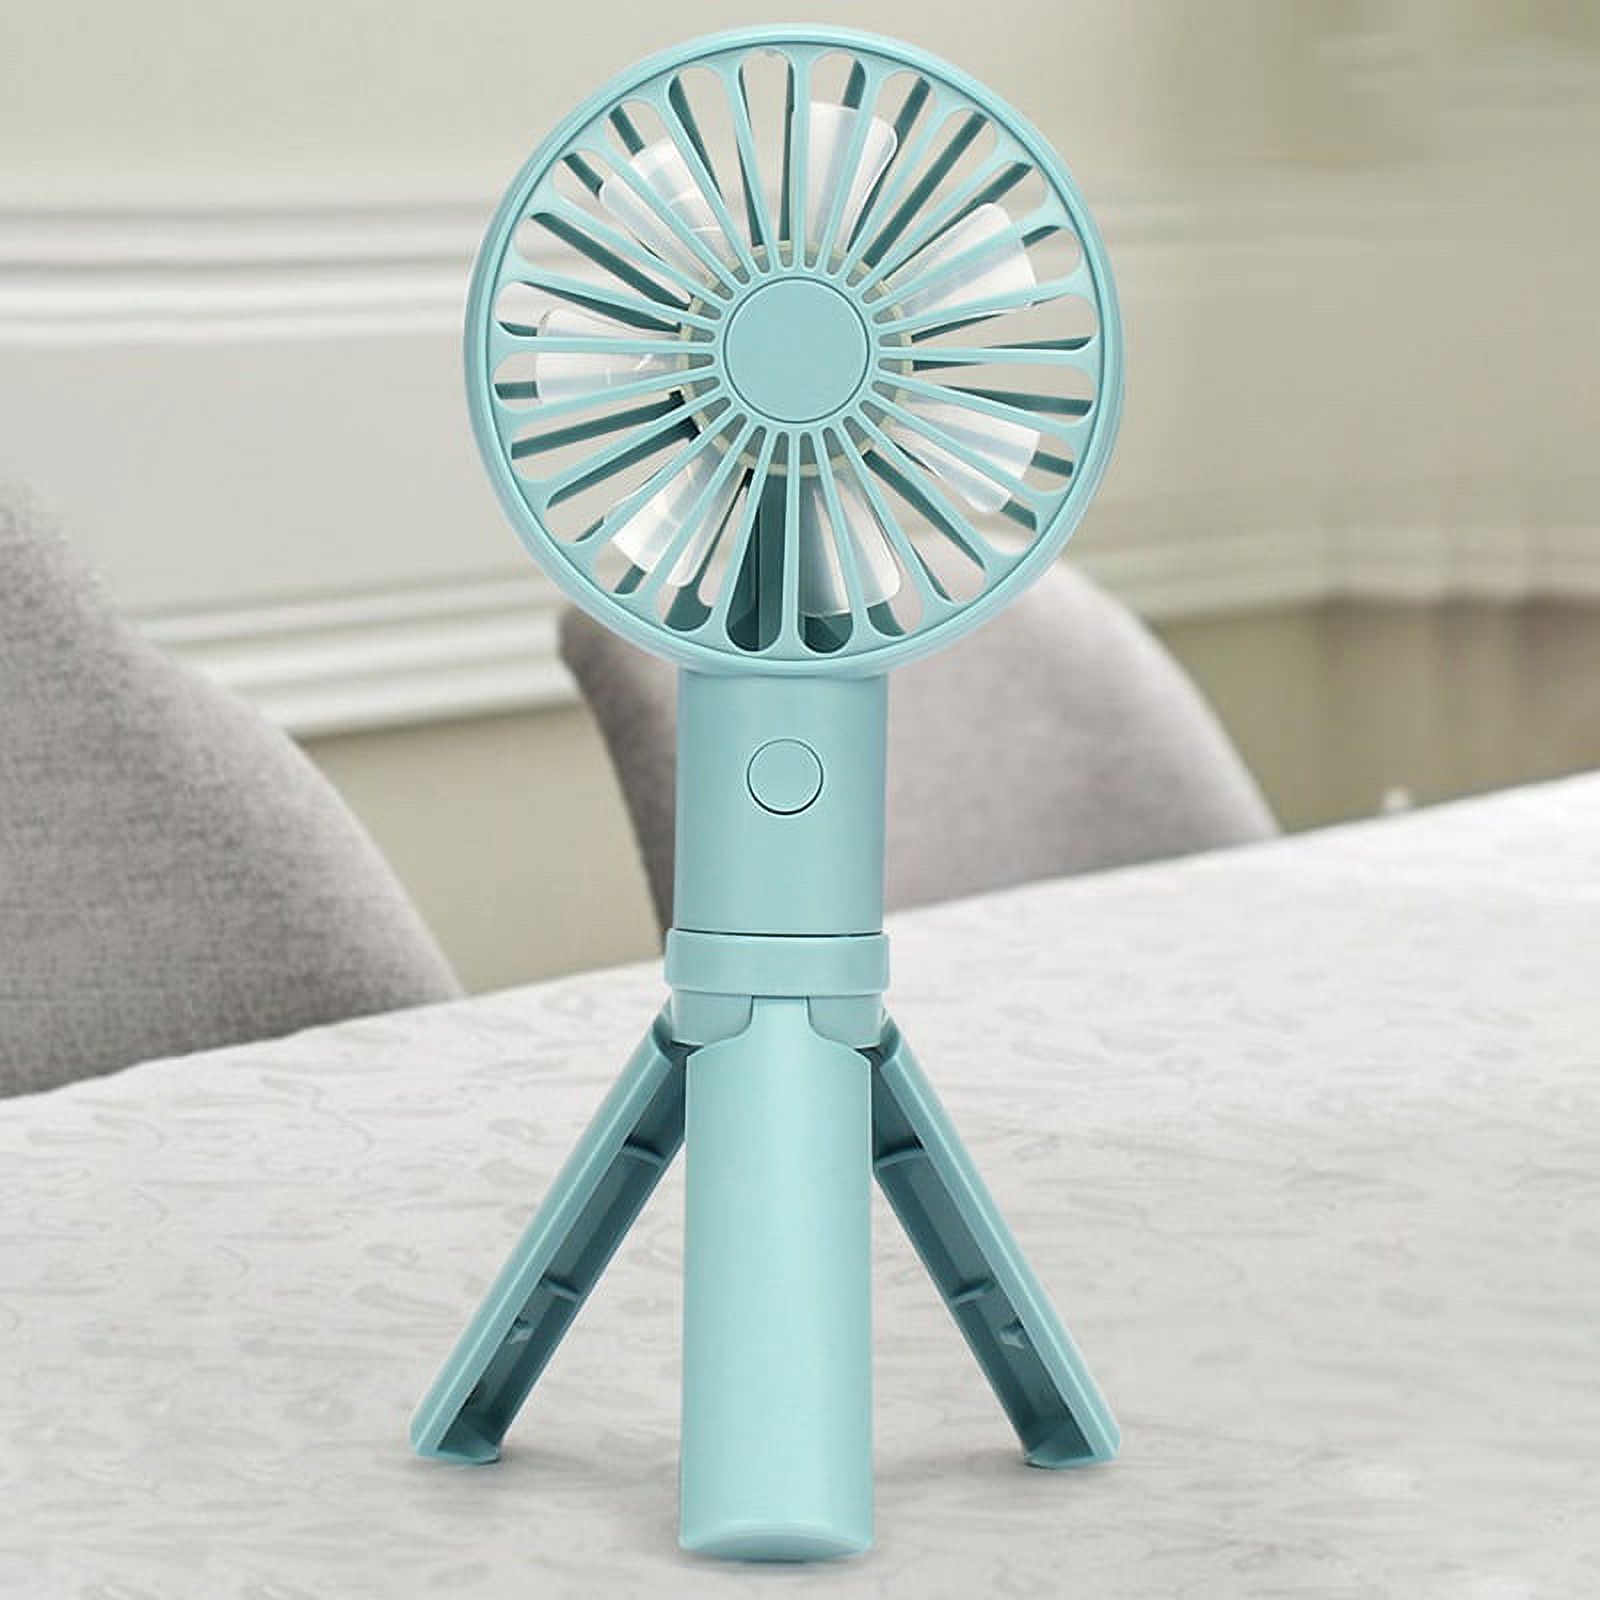 Handheld Portable Fan Mini Hand Fan, USB Rechargeable Personal Fan, Small Fan with 3 Speeds for Travel/Commute/Makeup(1 pack) - image 2 of 6